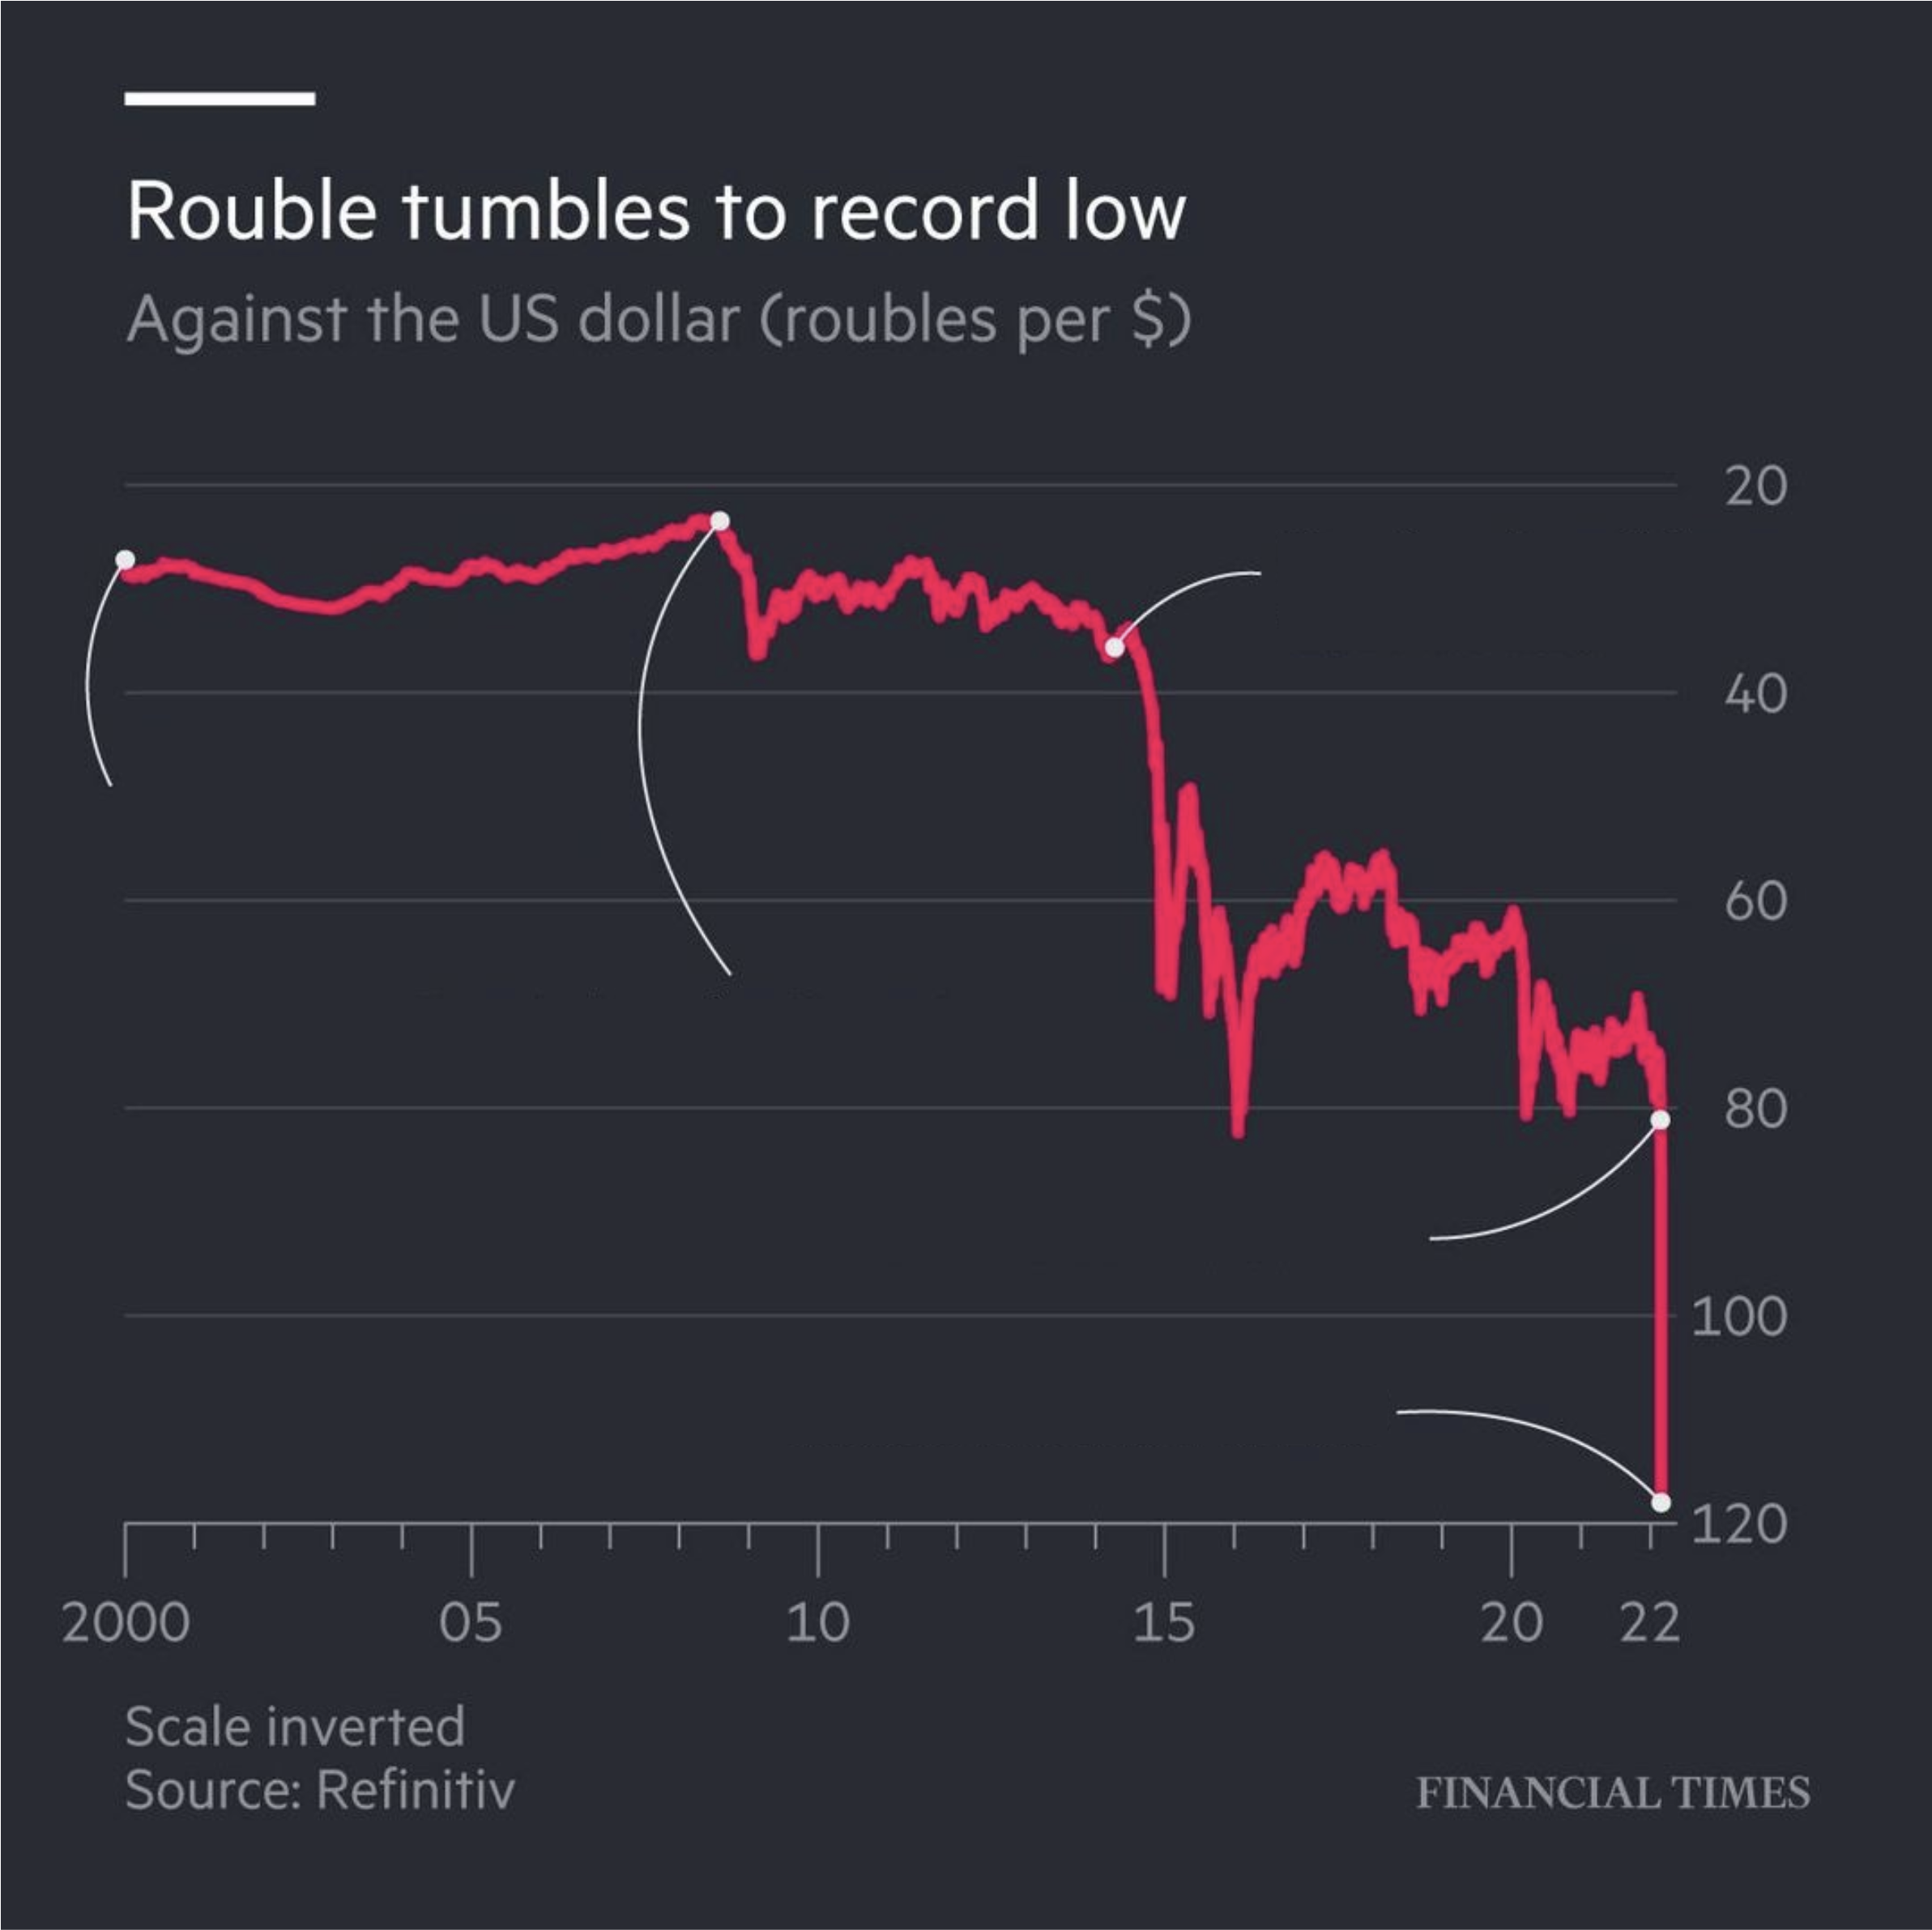 A chart titled 'Rouble tumbles to record low', showing the devaluation of the Russian rouble over the 2000 - 2022 period